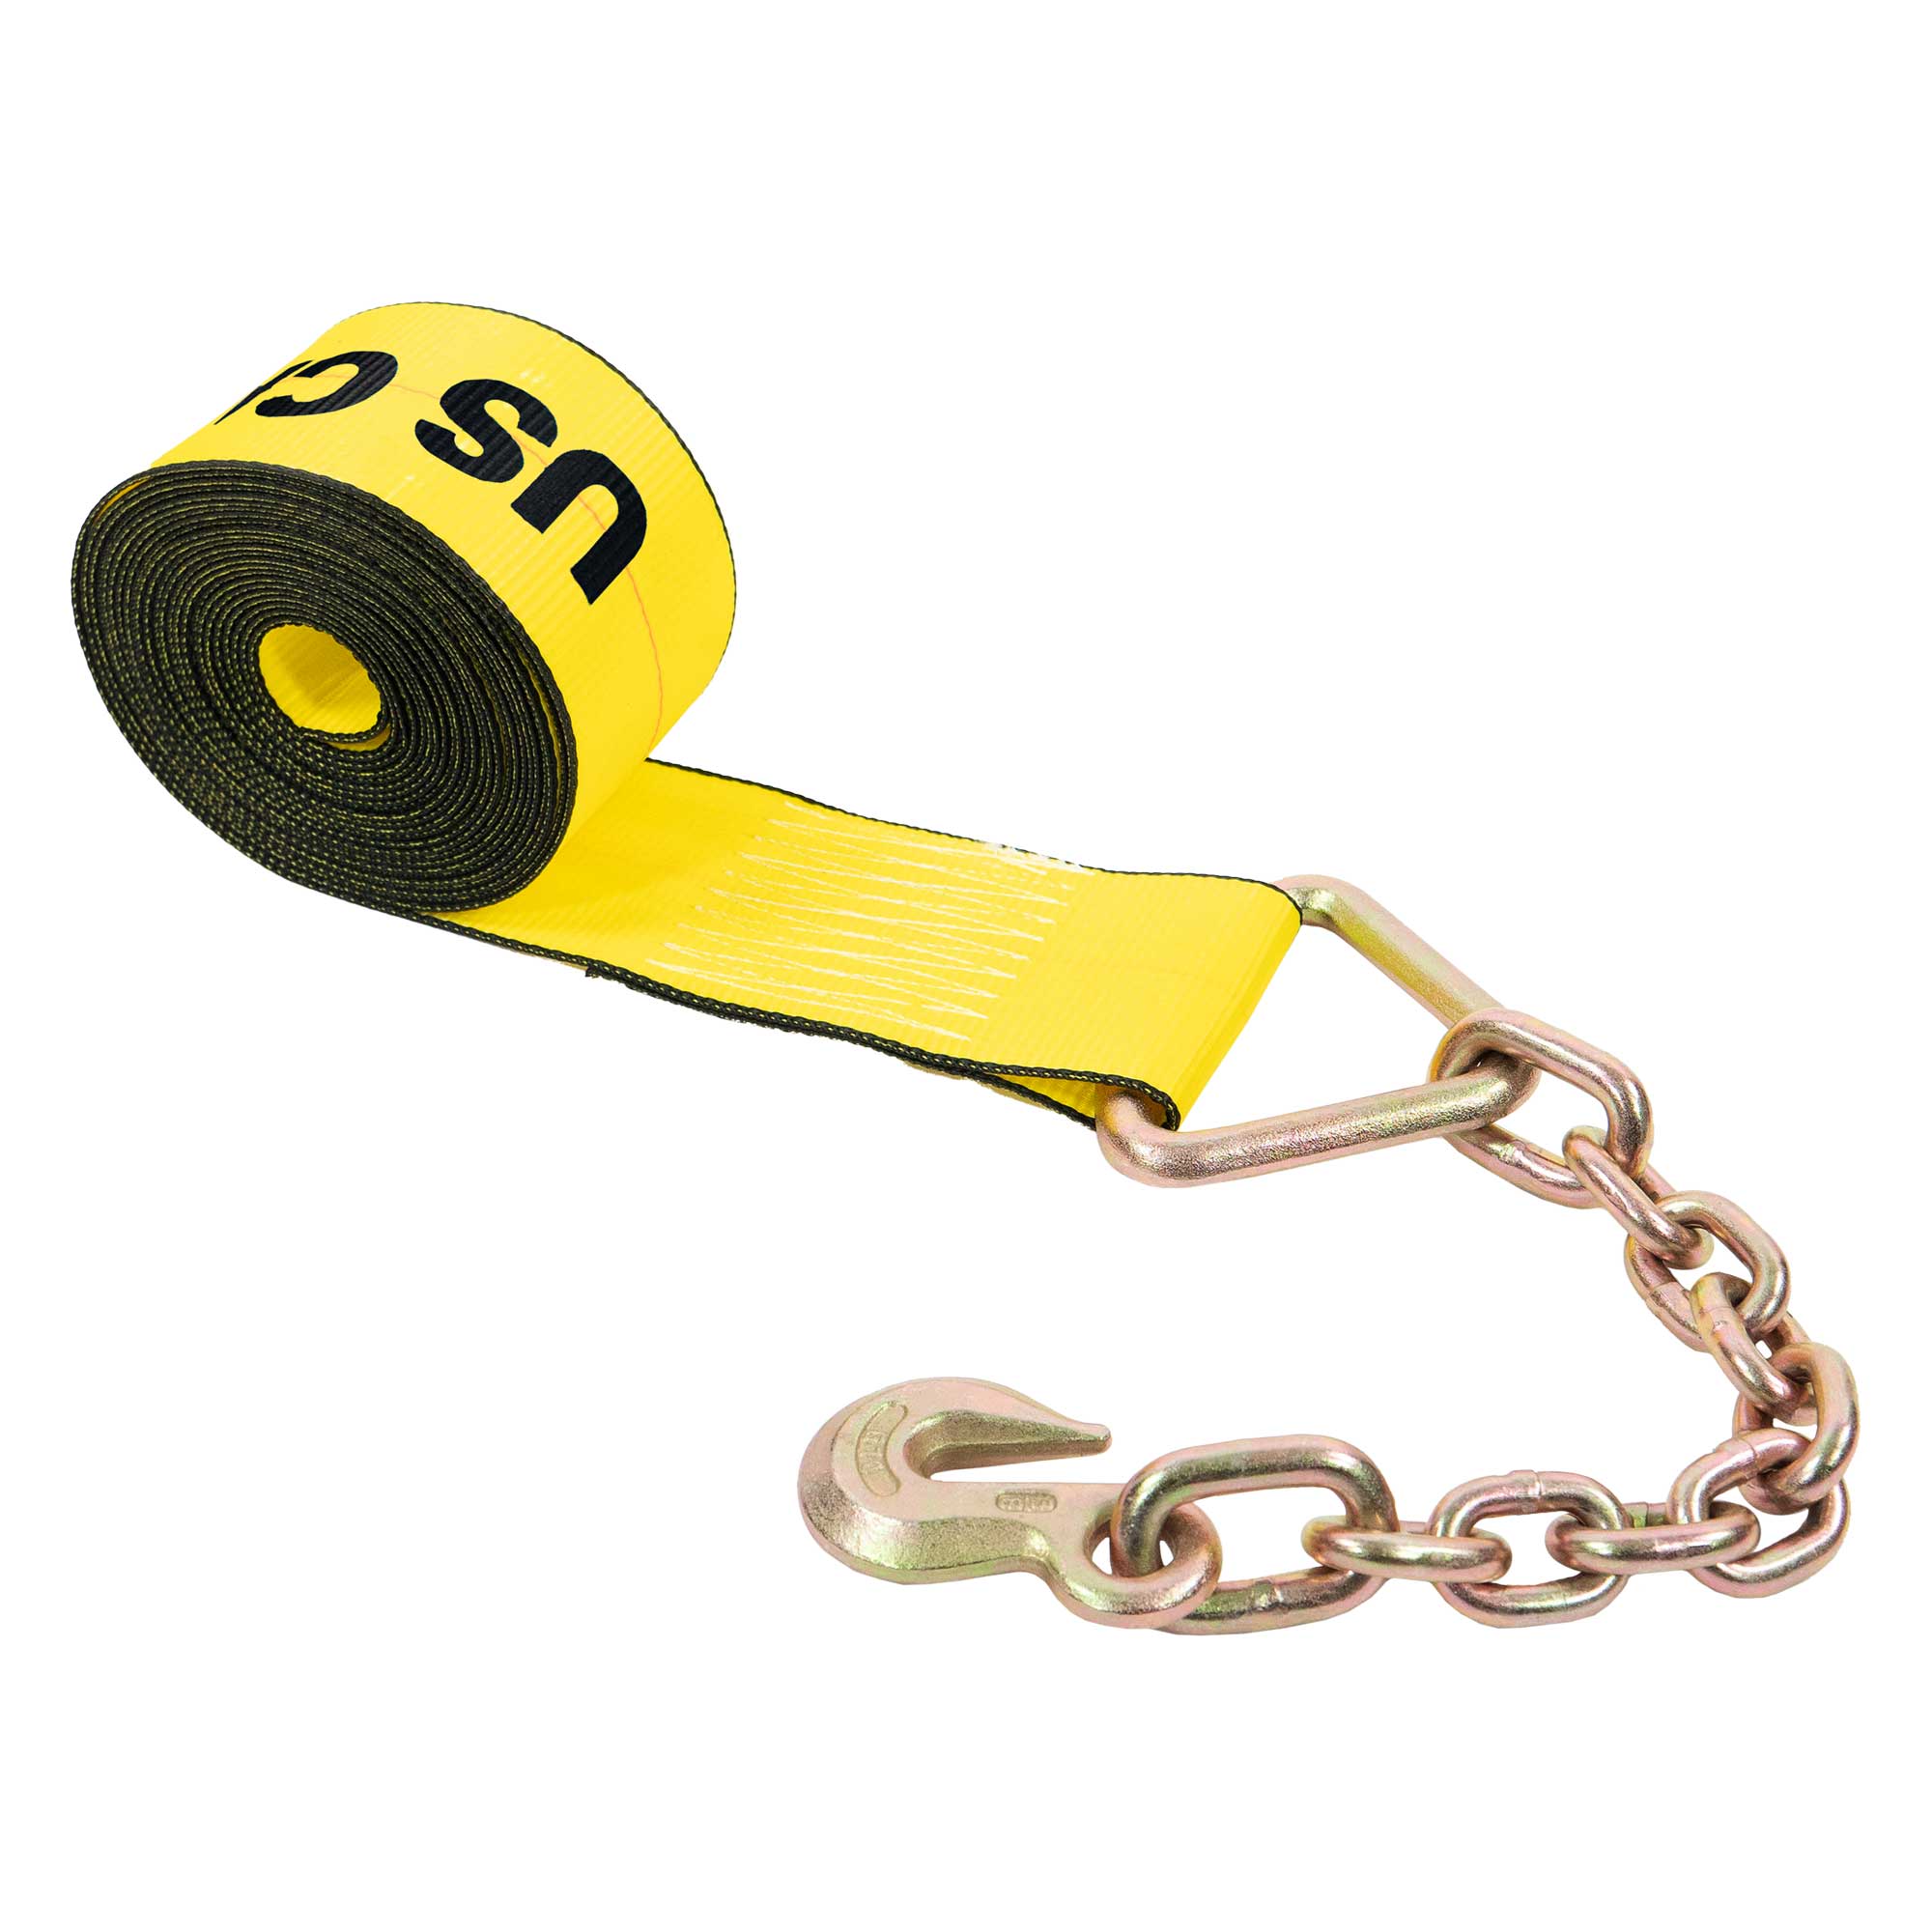 4 x 30' Trailer Winch Strap with 18 Chain End